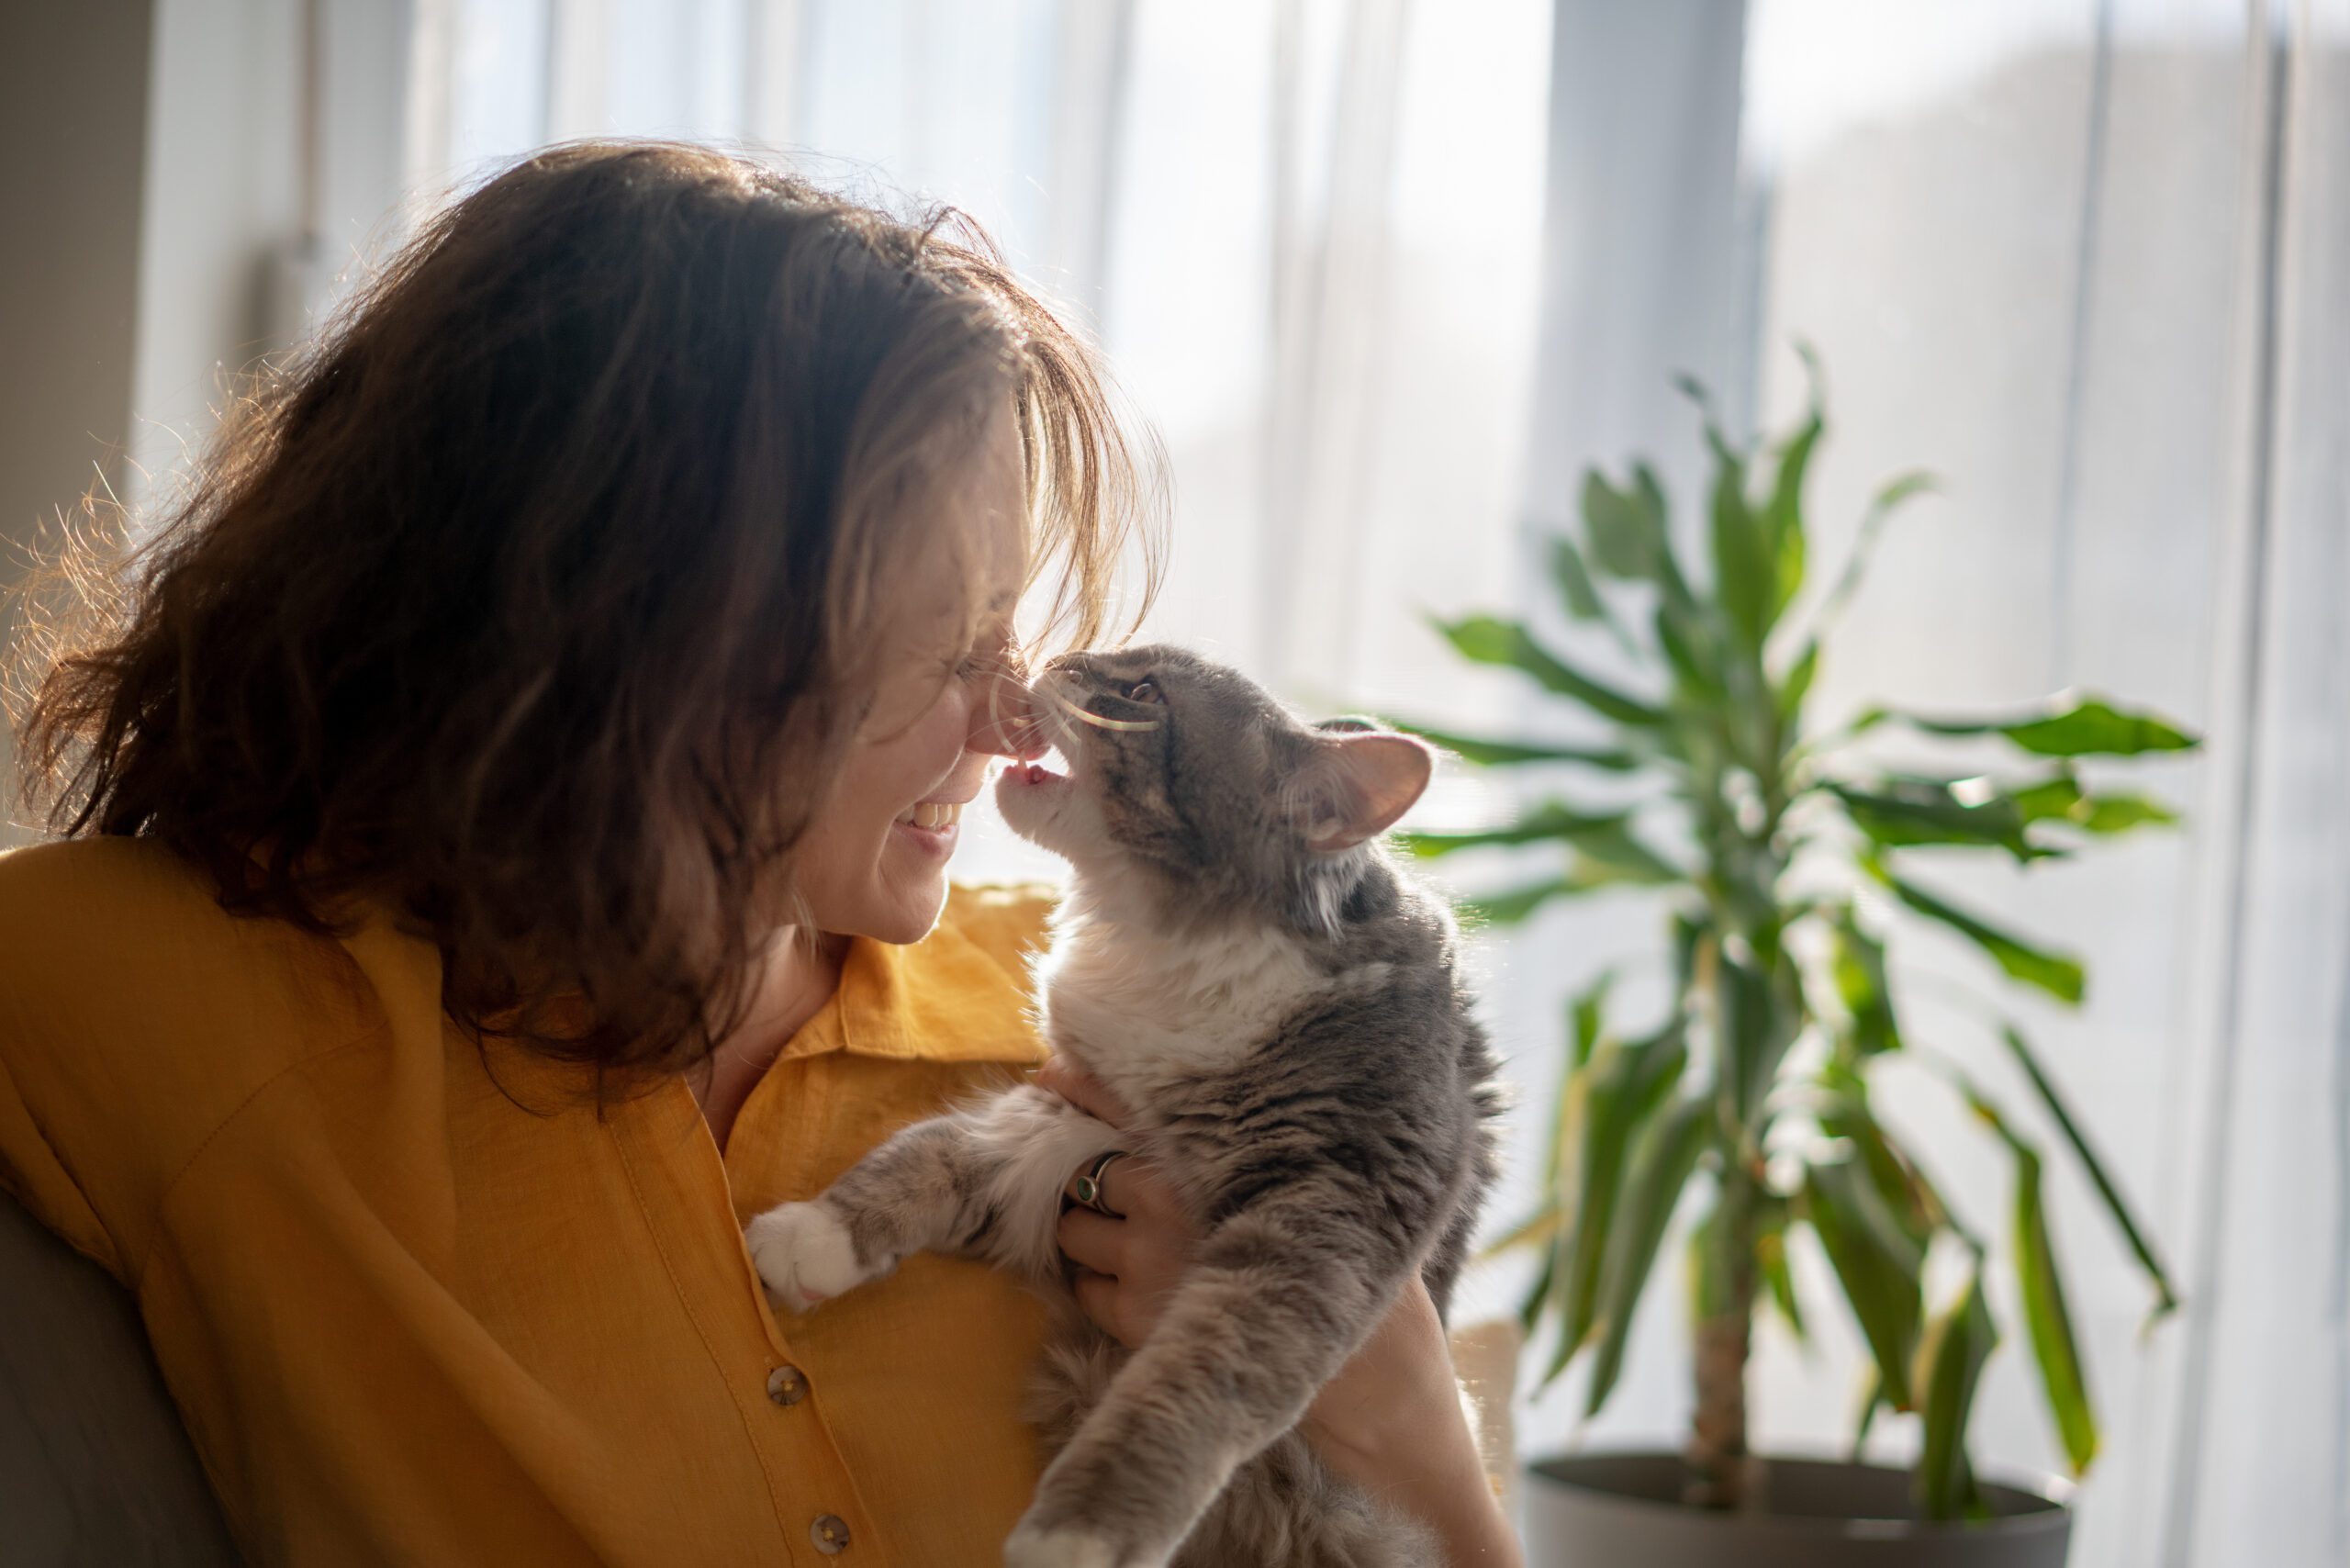 Why is my cat biting me? There could be a few reasons why your cat tries to bite you when you pet them.